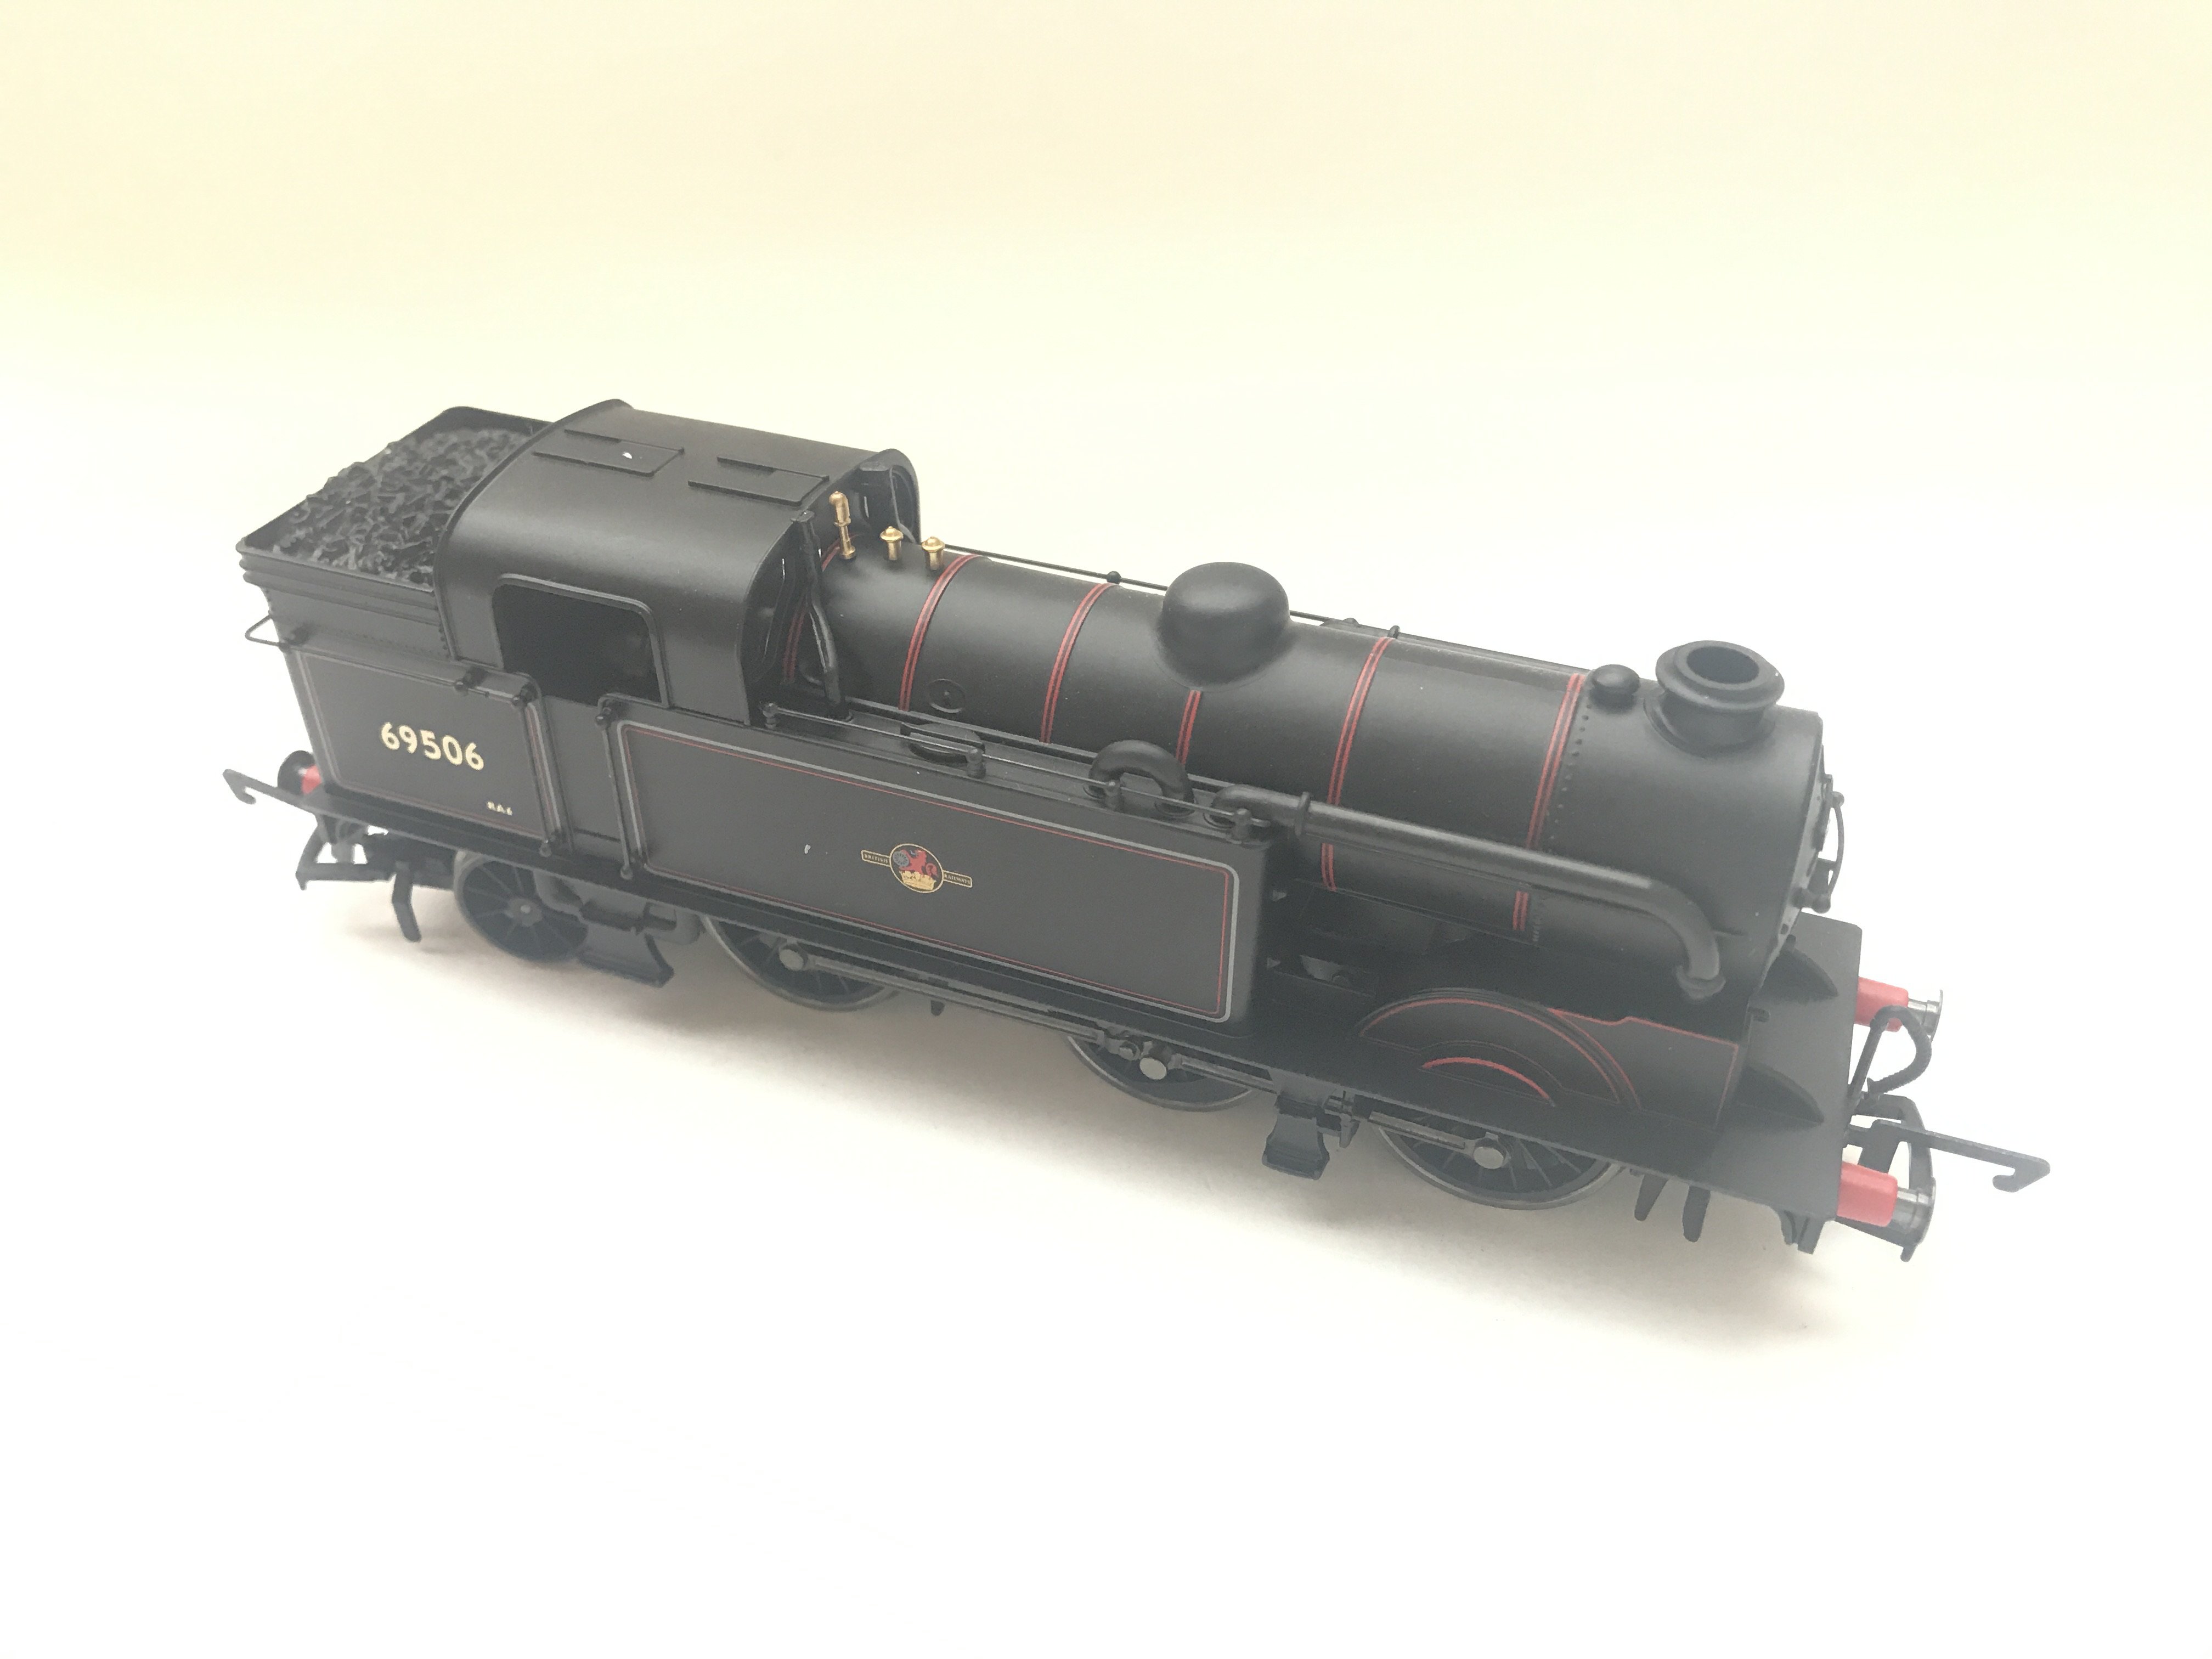 A Hornby Br 0-6-2 Class N2 Locomotive'69506' boxed - Image 2 of 2